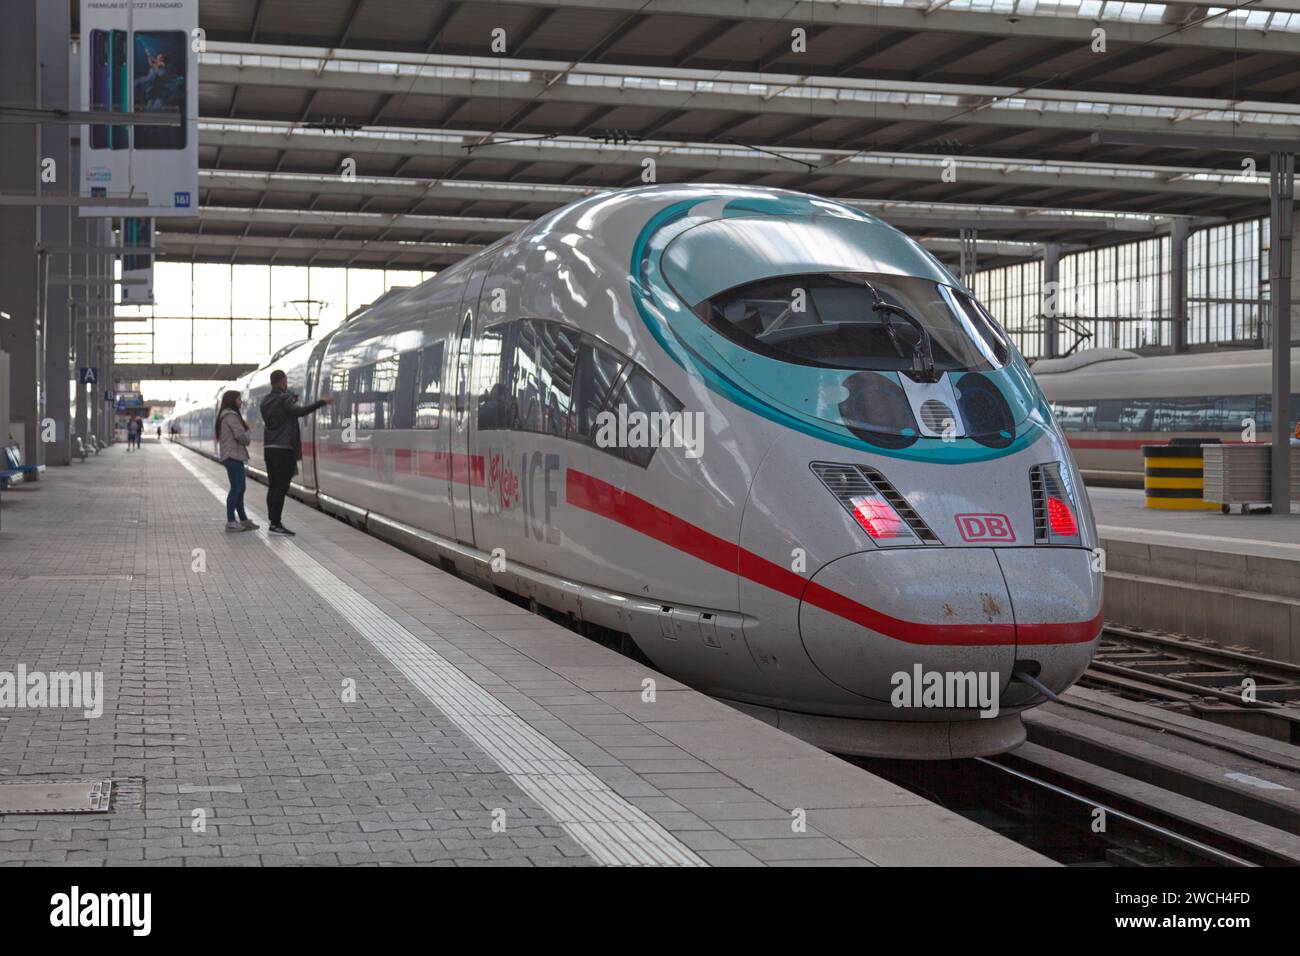 Munich, Germany - May 30 2019: A high-speed train ICE 3 (Class 403) at a plateform of München Hauptbahnhof (German for Munich main railway station). Stock Photo